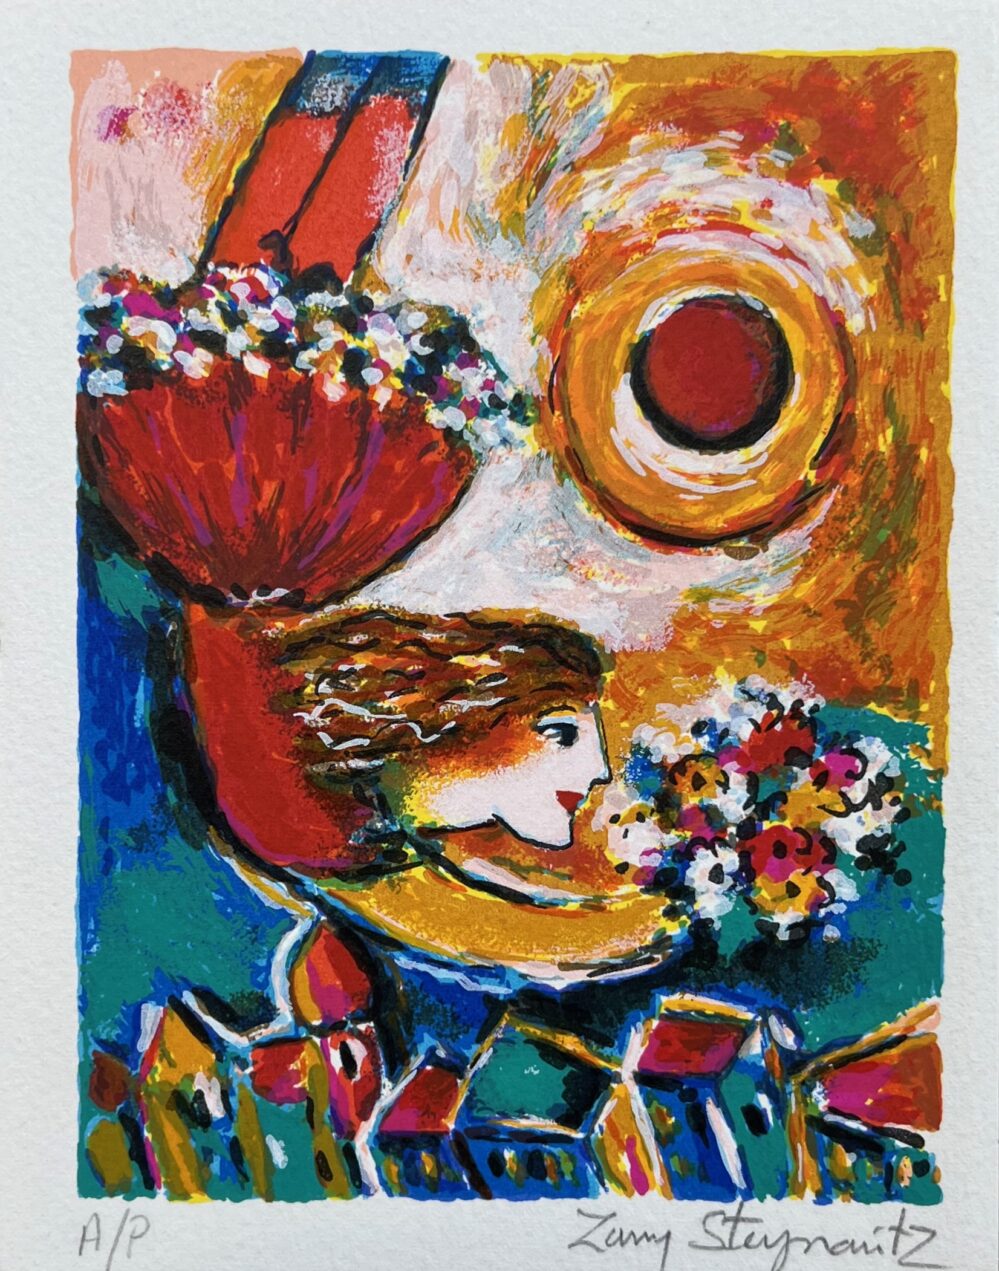 ZAMY STEYNOVITZ DANCER WITH BOUQUET Hand Signed Limited Edition Lithograph